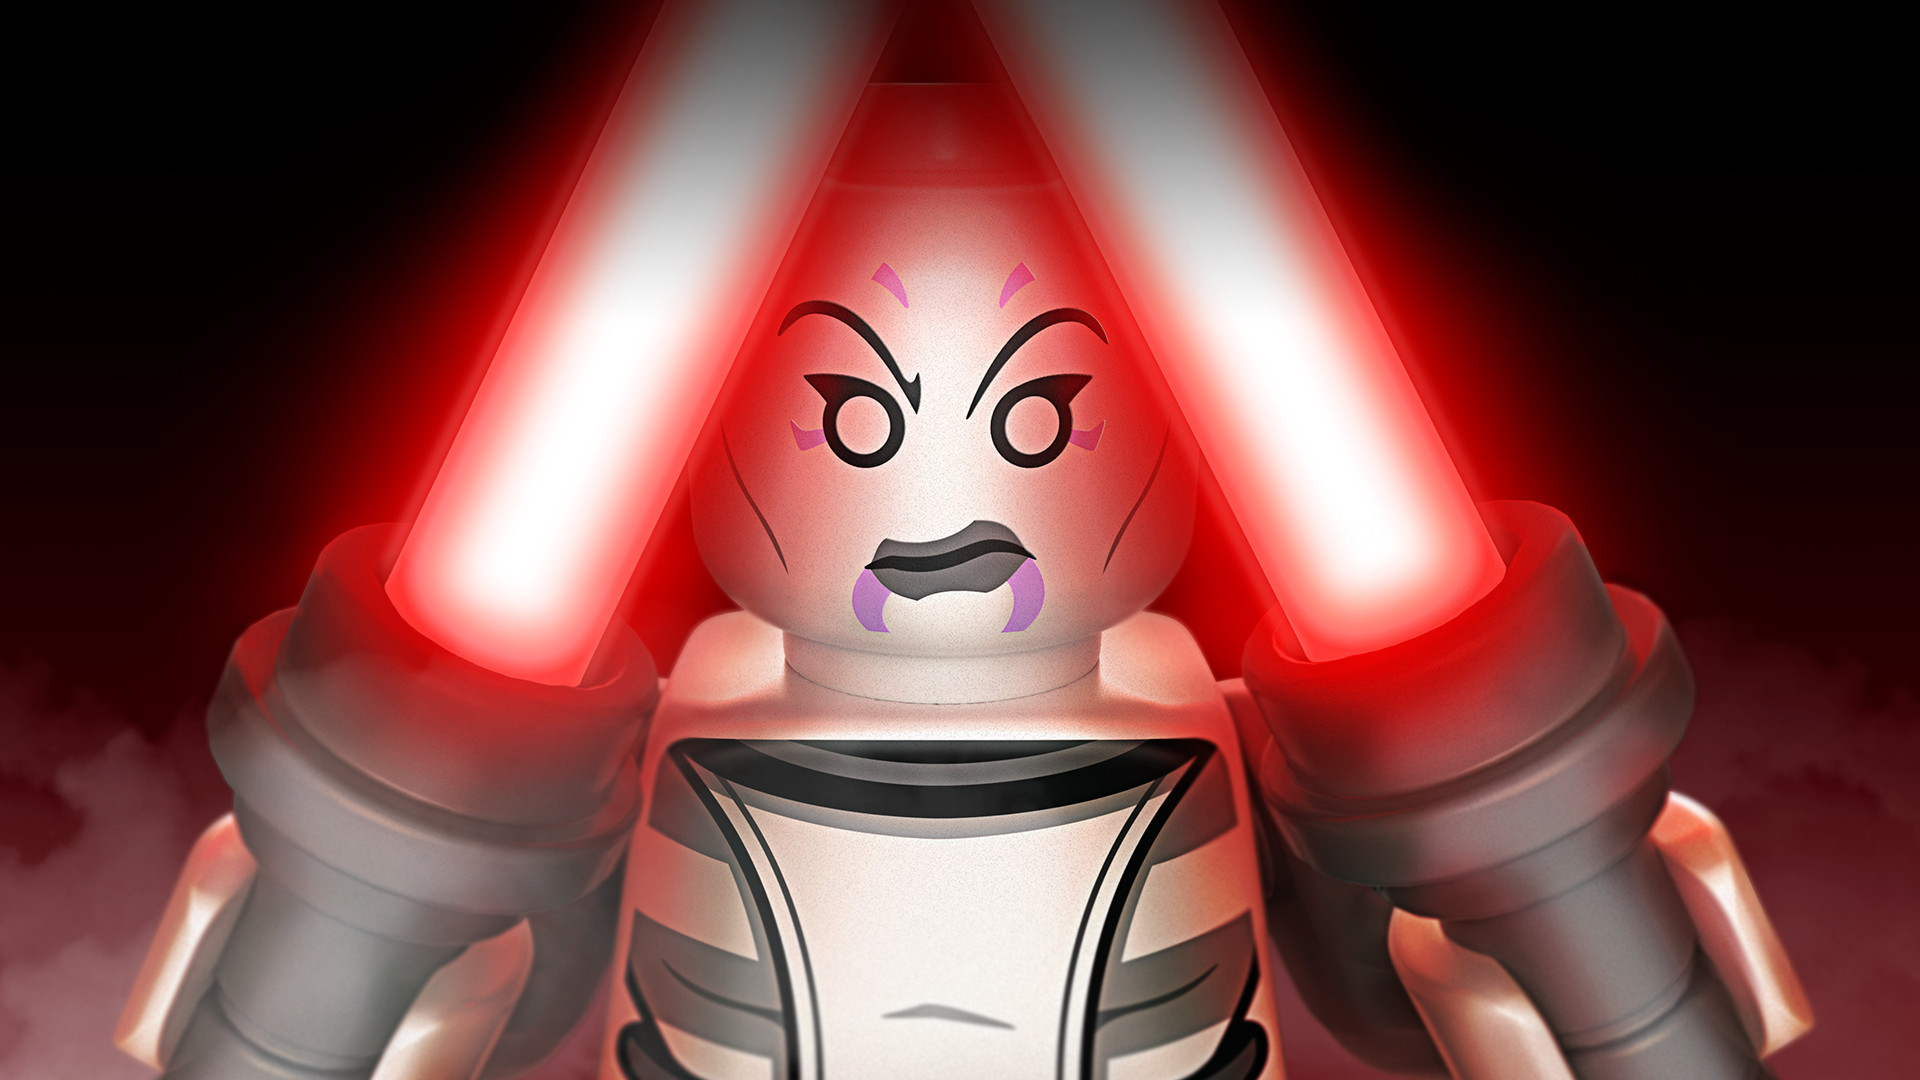 LEGO Star Wars: The Force Awakens - The Clone Wars Character Pack DLC Steam CD Key [$ 1.68]